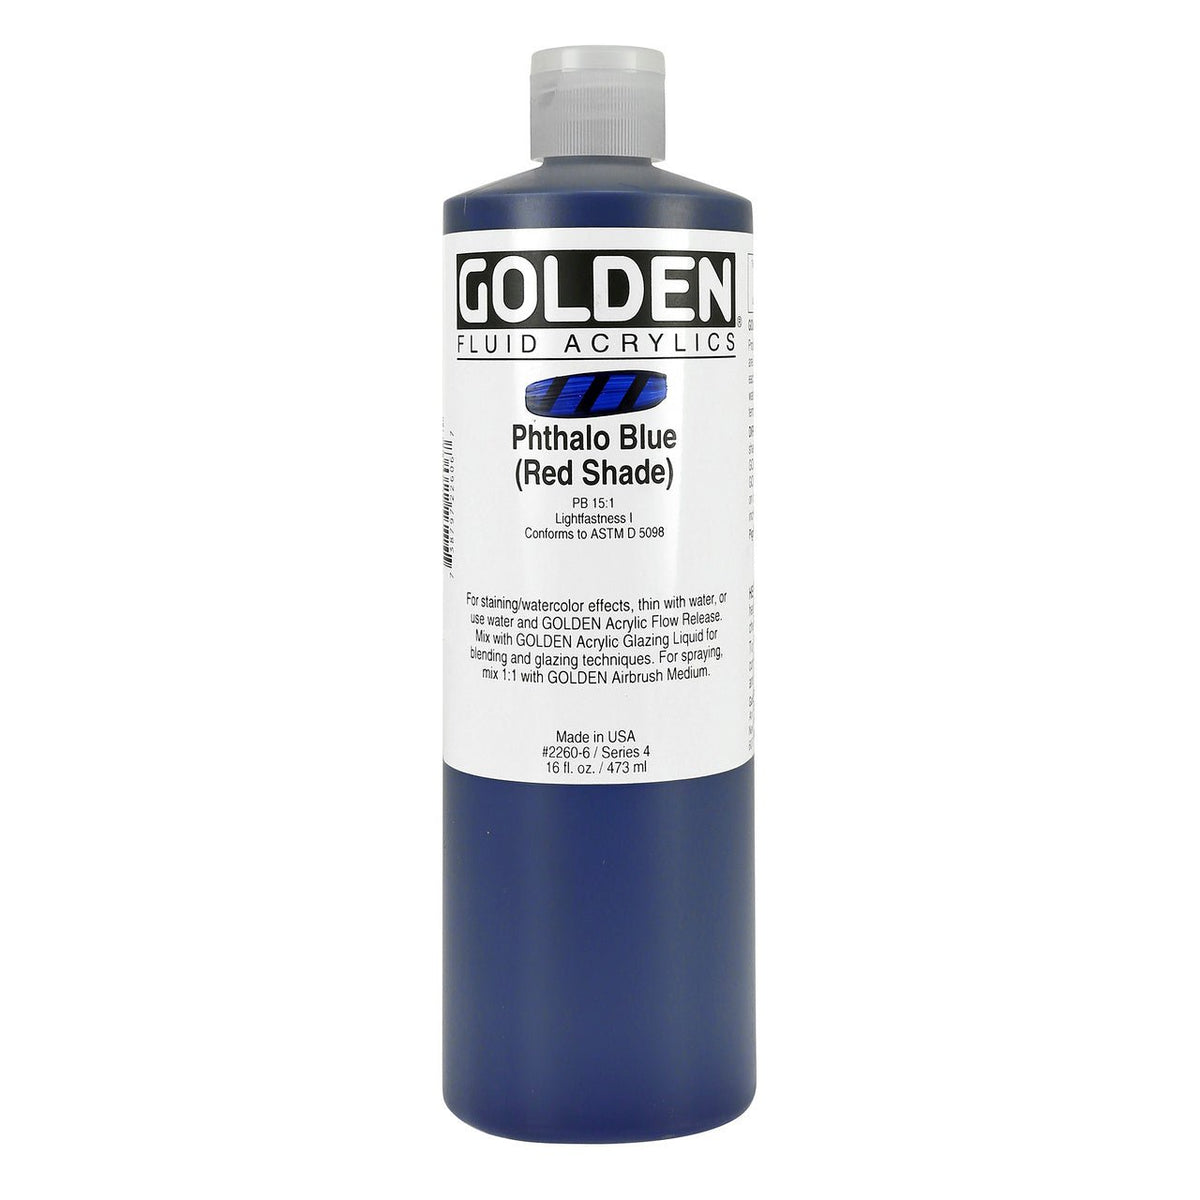 Golden Fluid Acrylic Phthalo Blue (red shade) 16 oz - merriartist.com